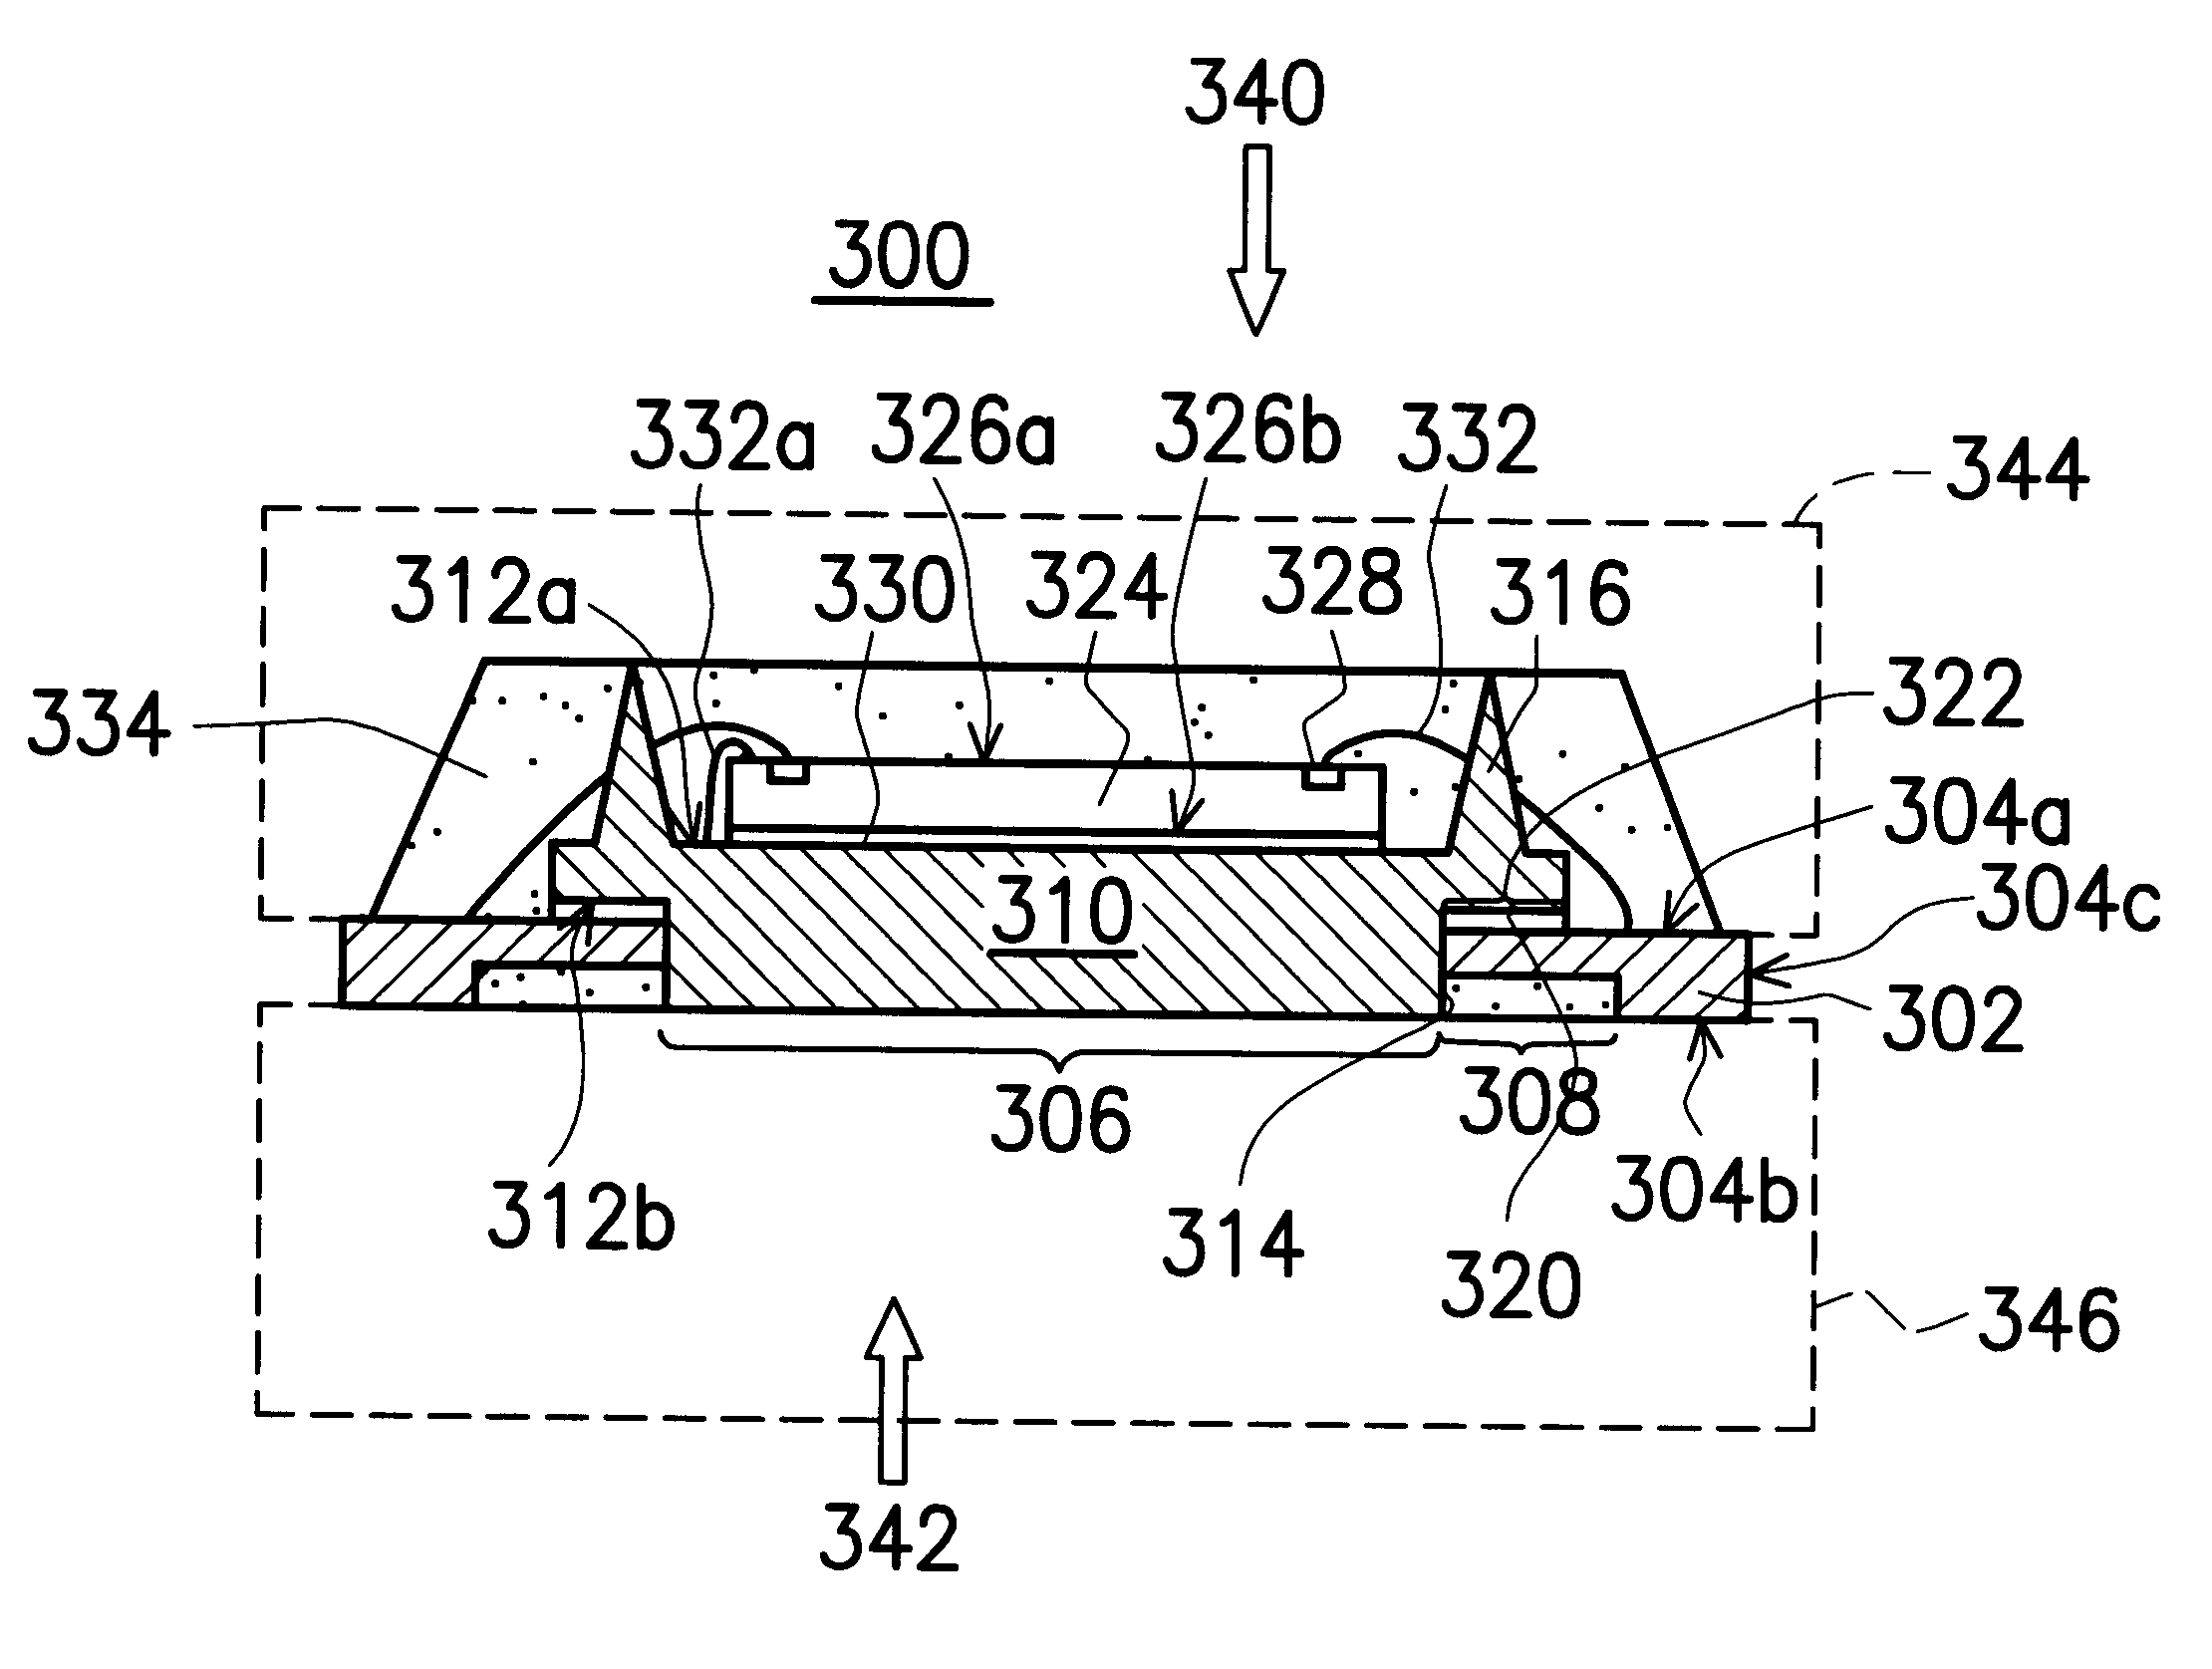 Universal lead frame type of quad flat non-lead package of semiconductor